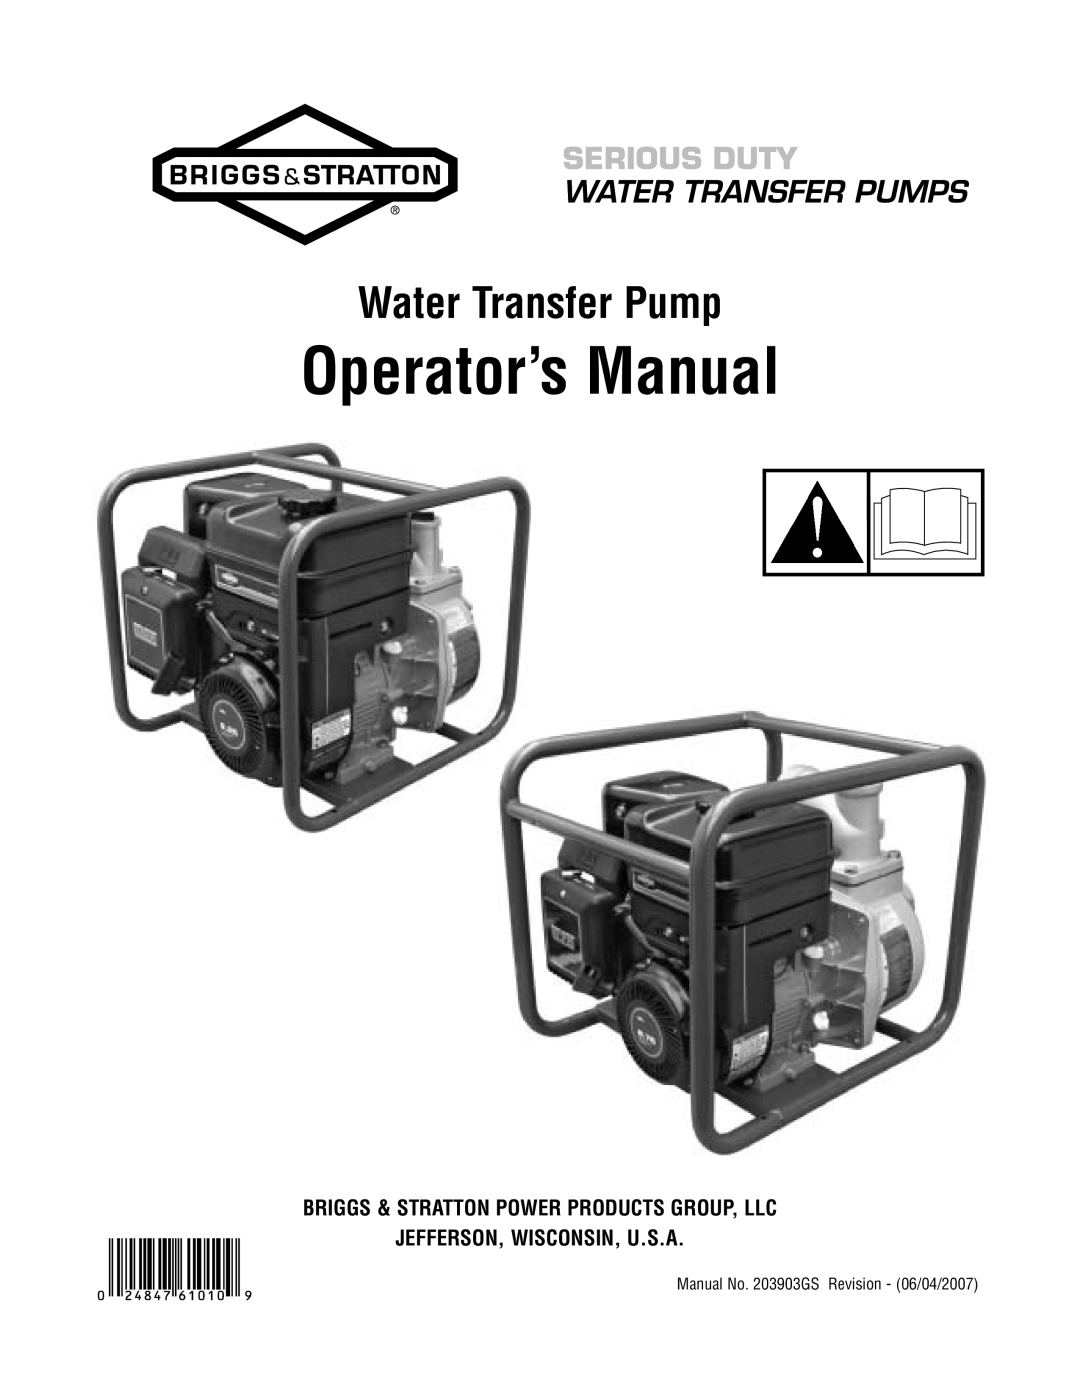 Briggs & Stratton Water Transfer Pump manual Operator’s Manual, Briggs & Stratton Power Products Group, Llc 